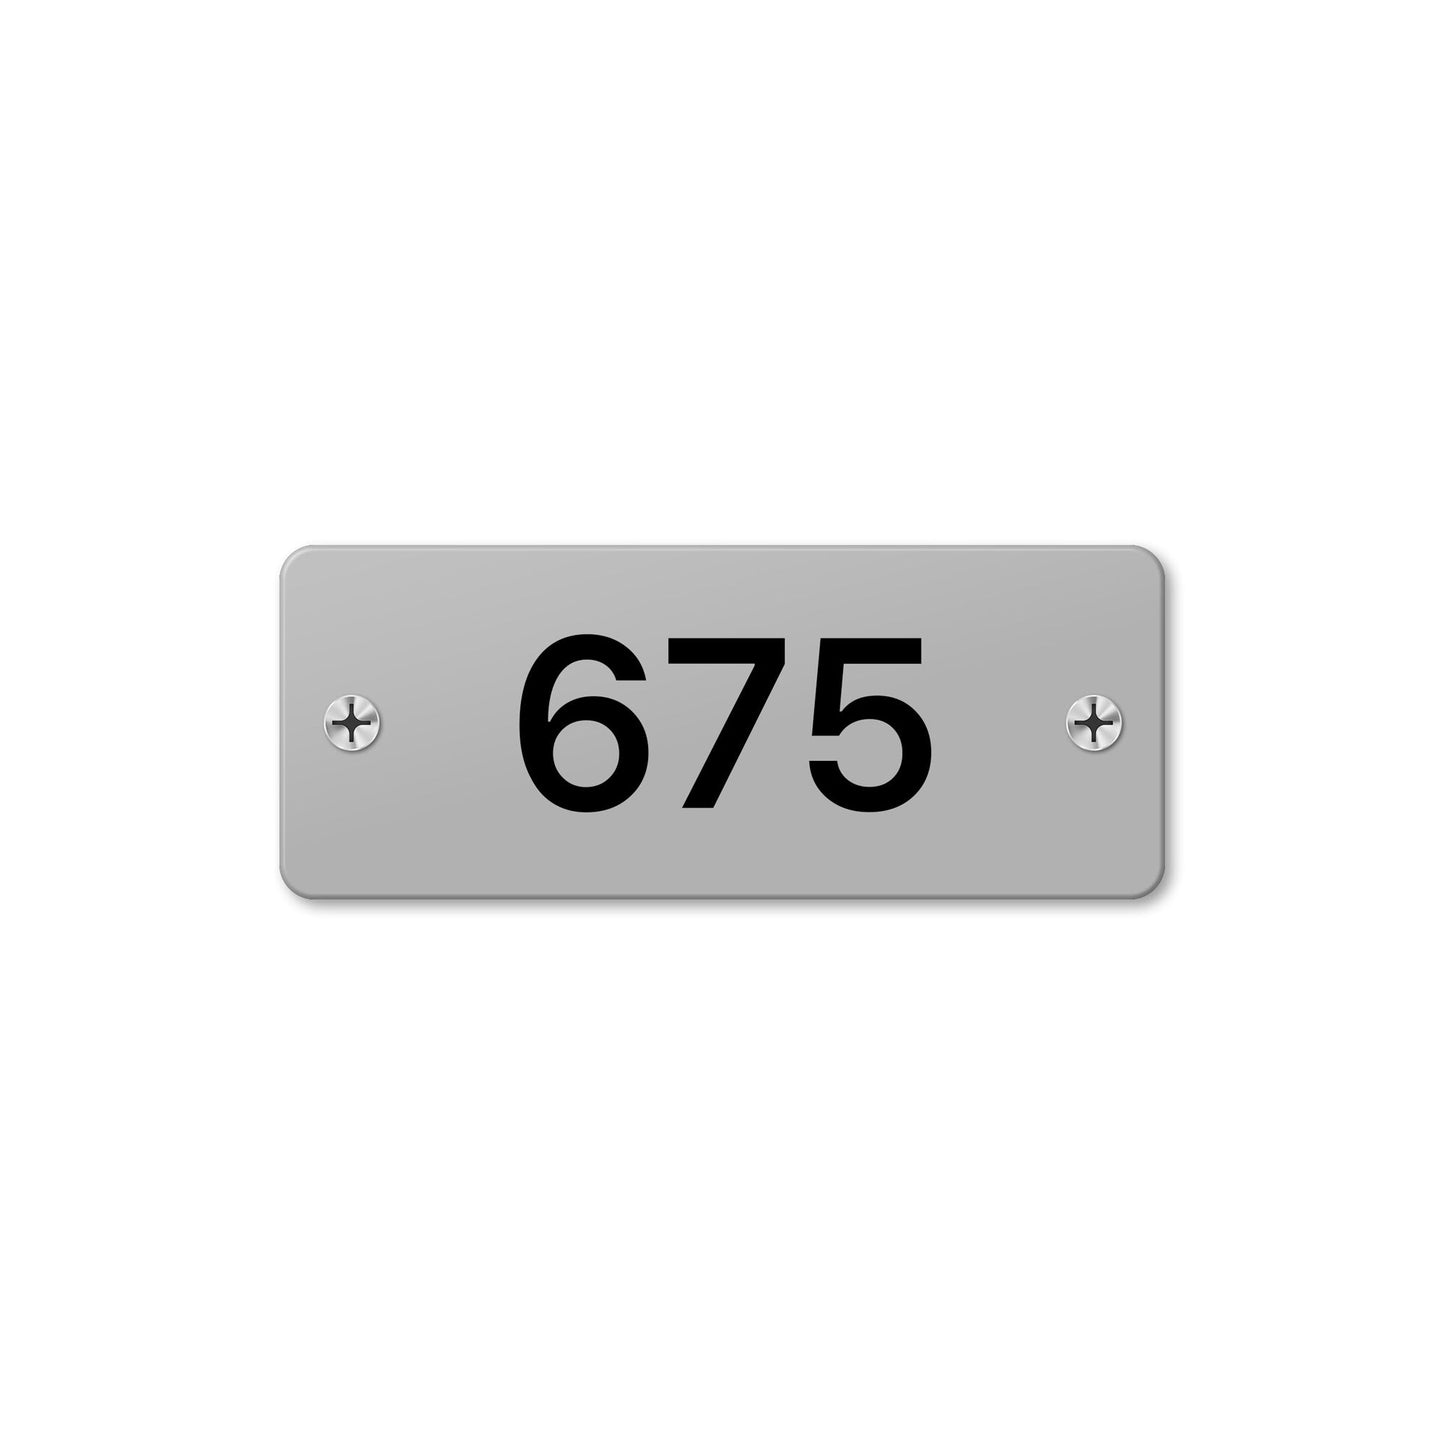 Numeral 675